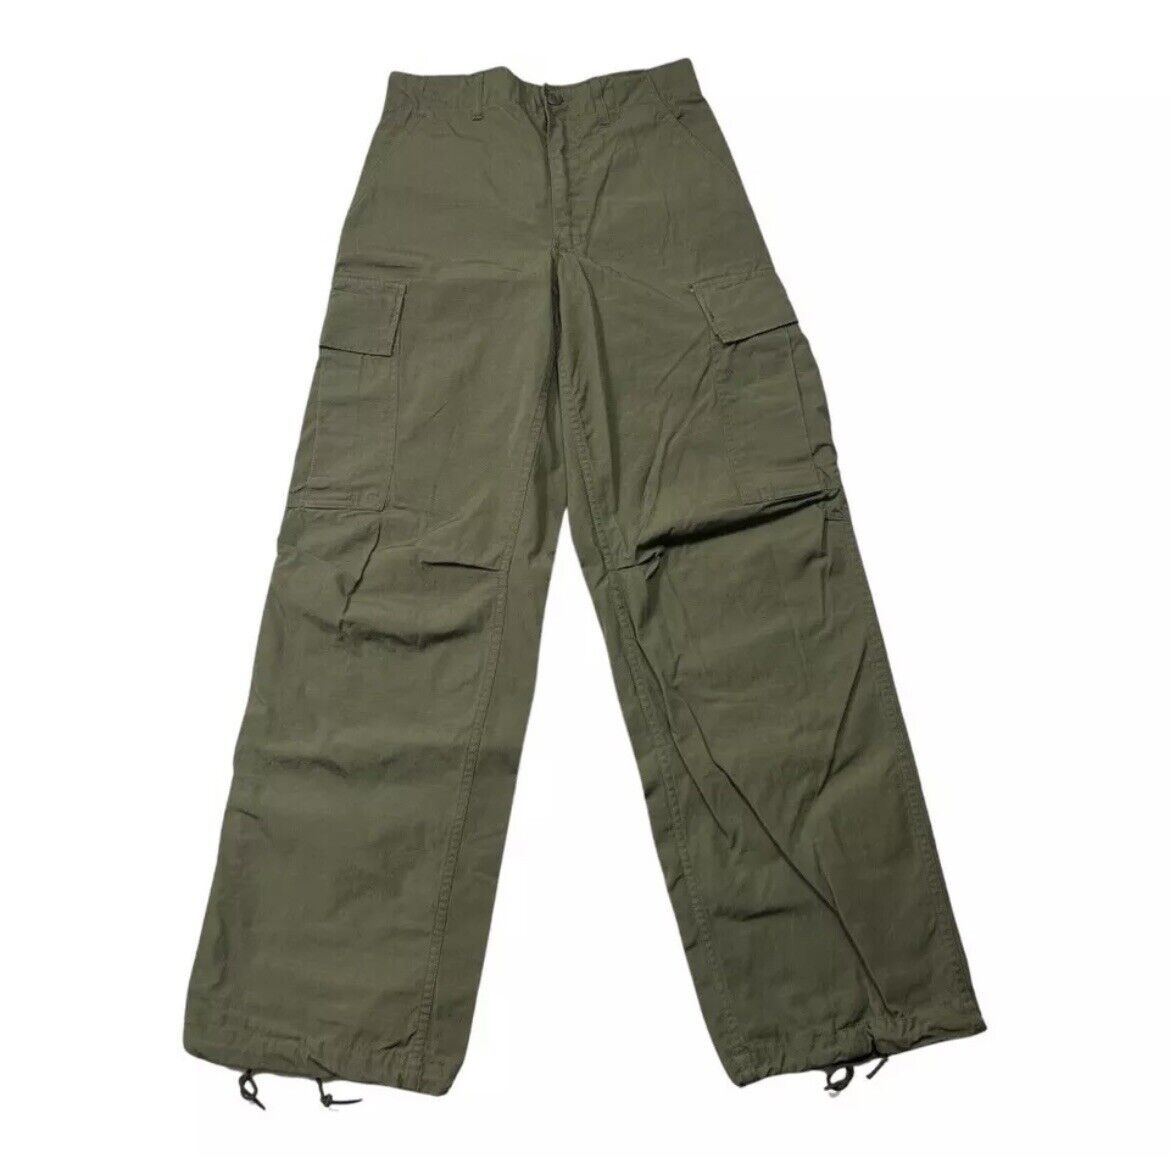 Vintage Military Pants Vietnam Tropical OG 107 Long Small 60s Olive Green Cargo